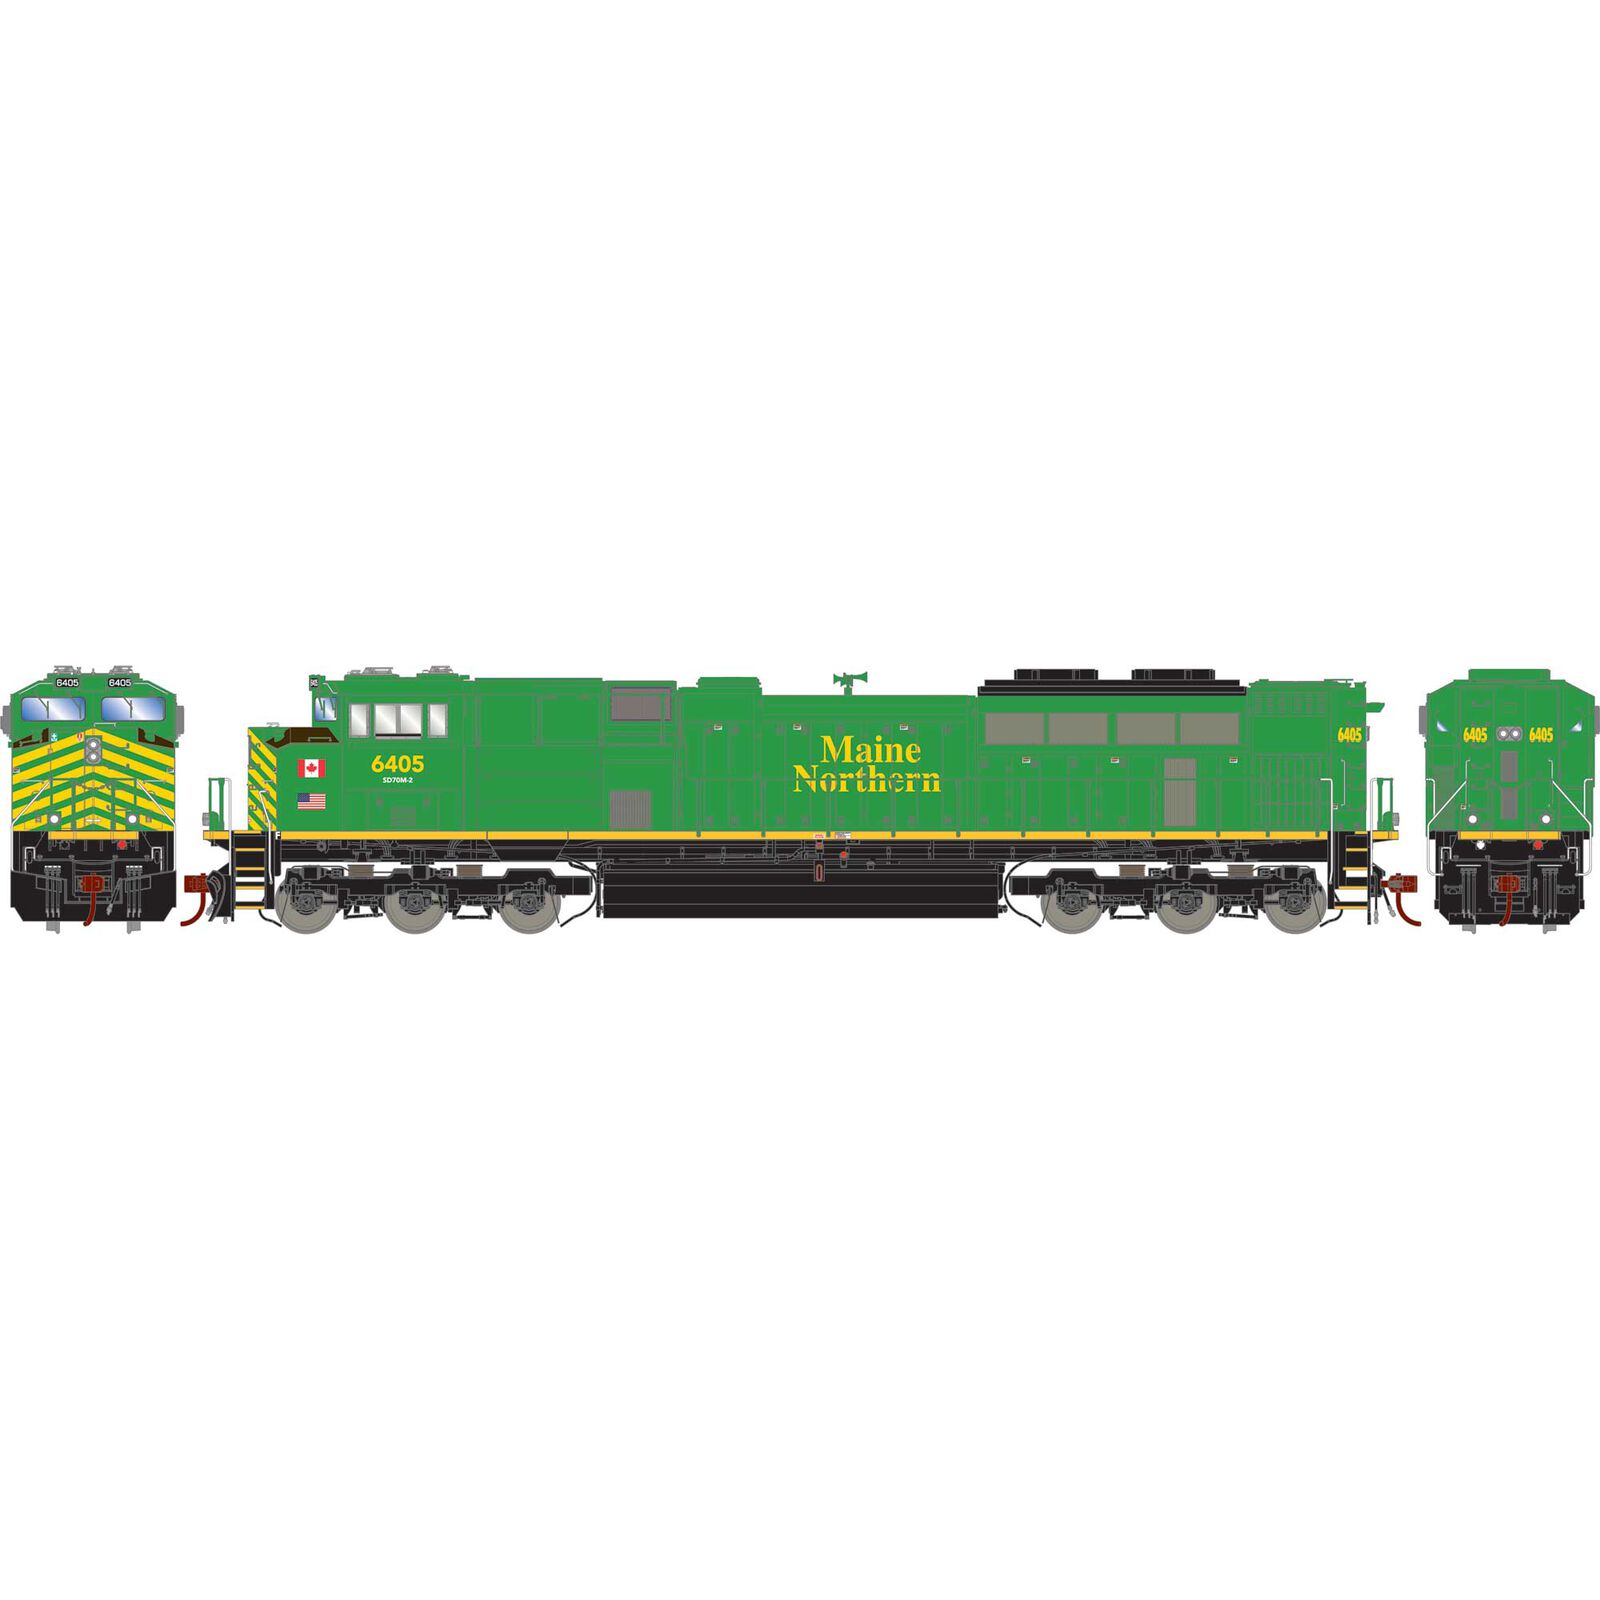 HO SD70M-2 Locomotive with DCC & Sound, Maine Northern NBSR#6405